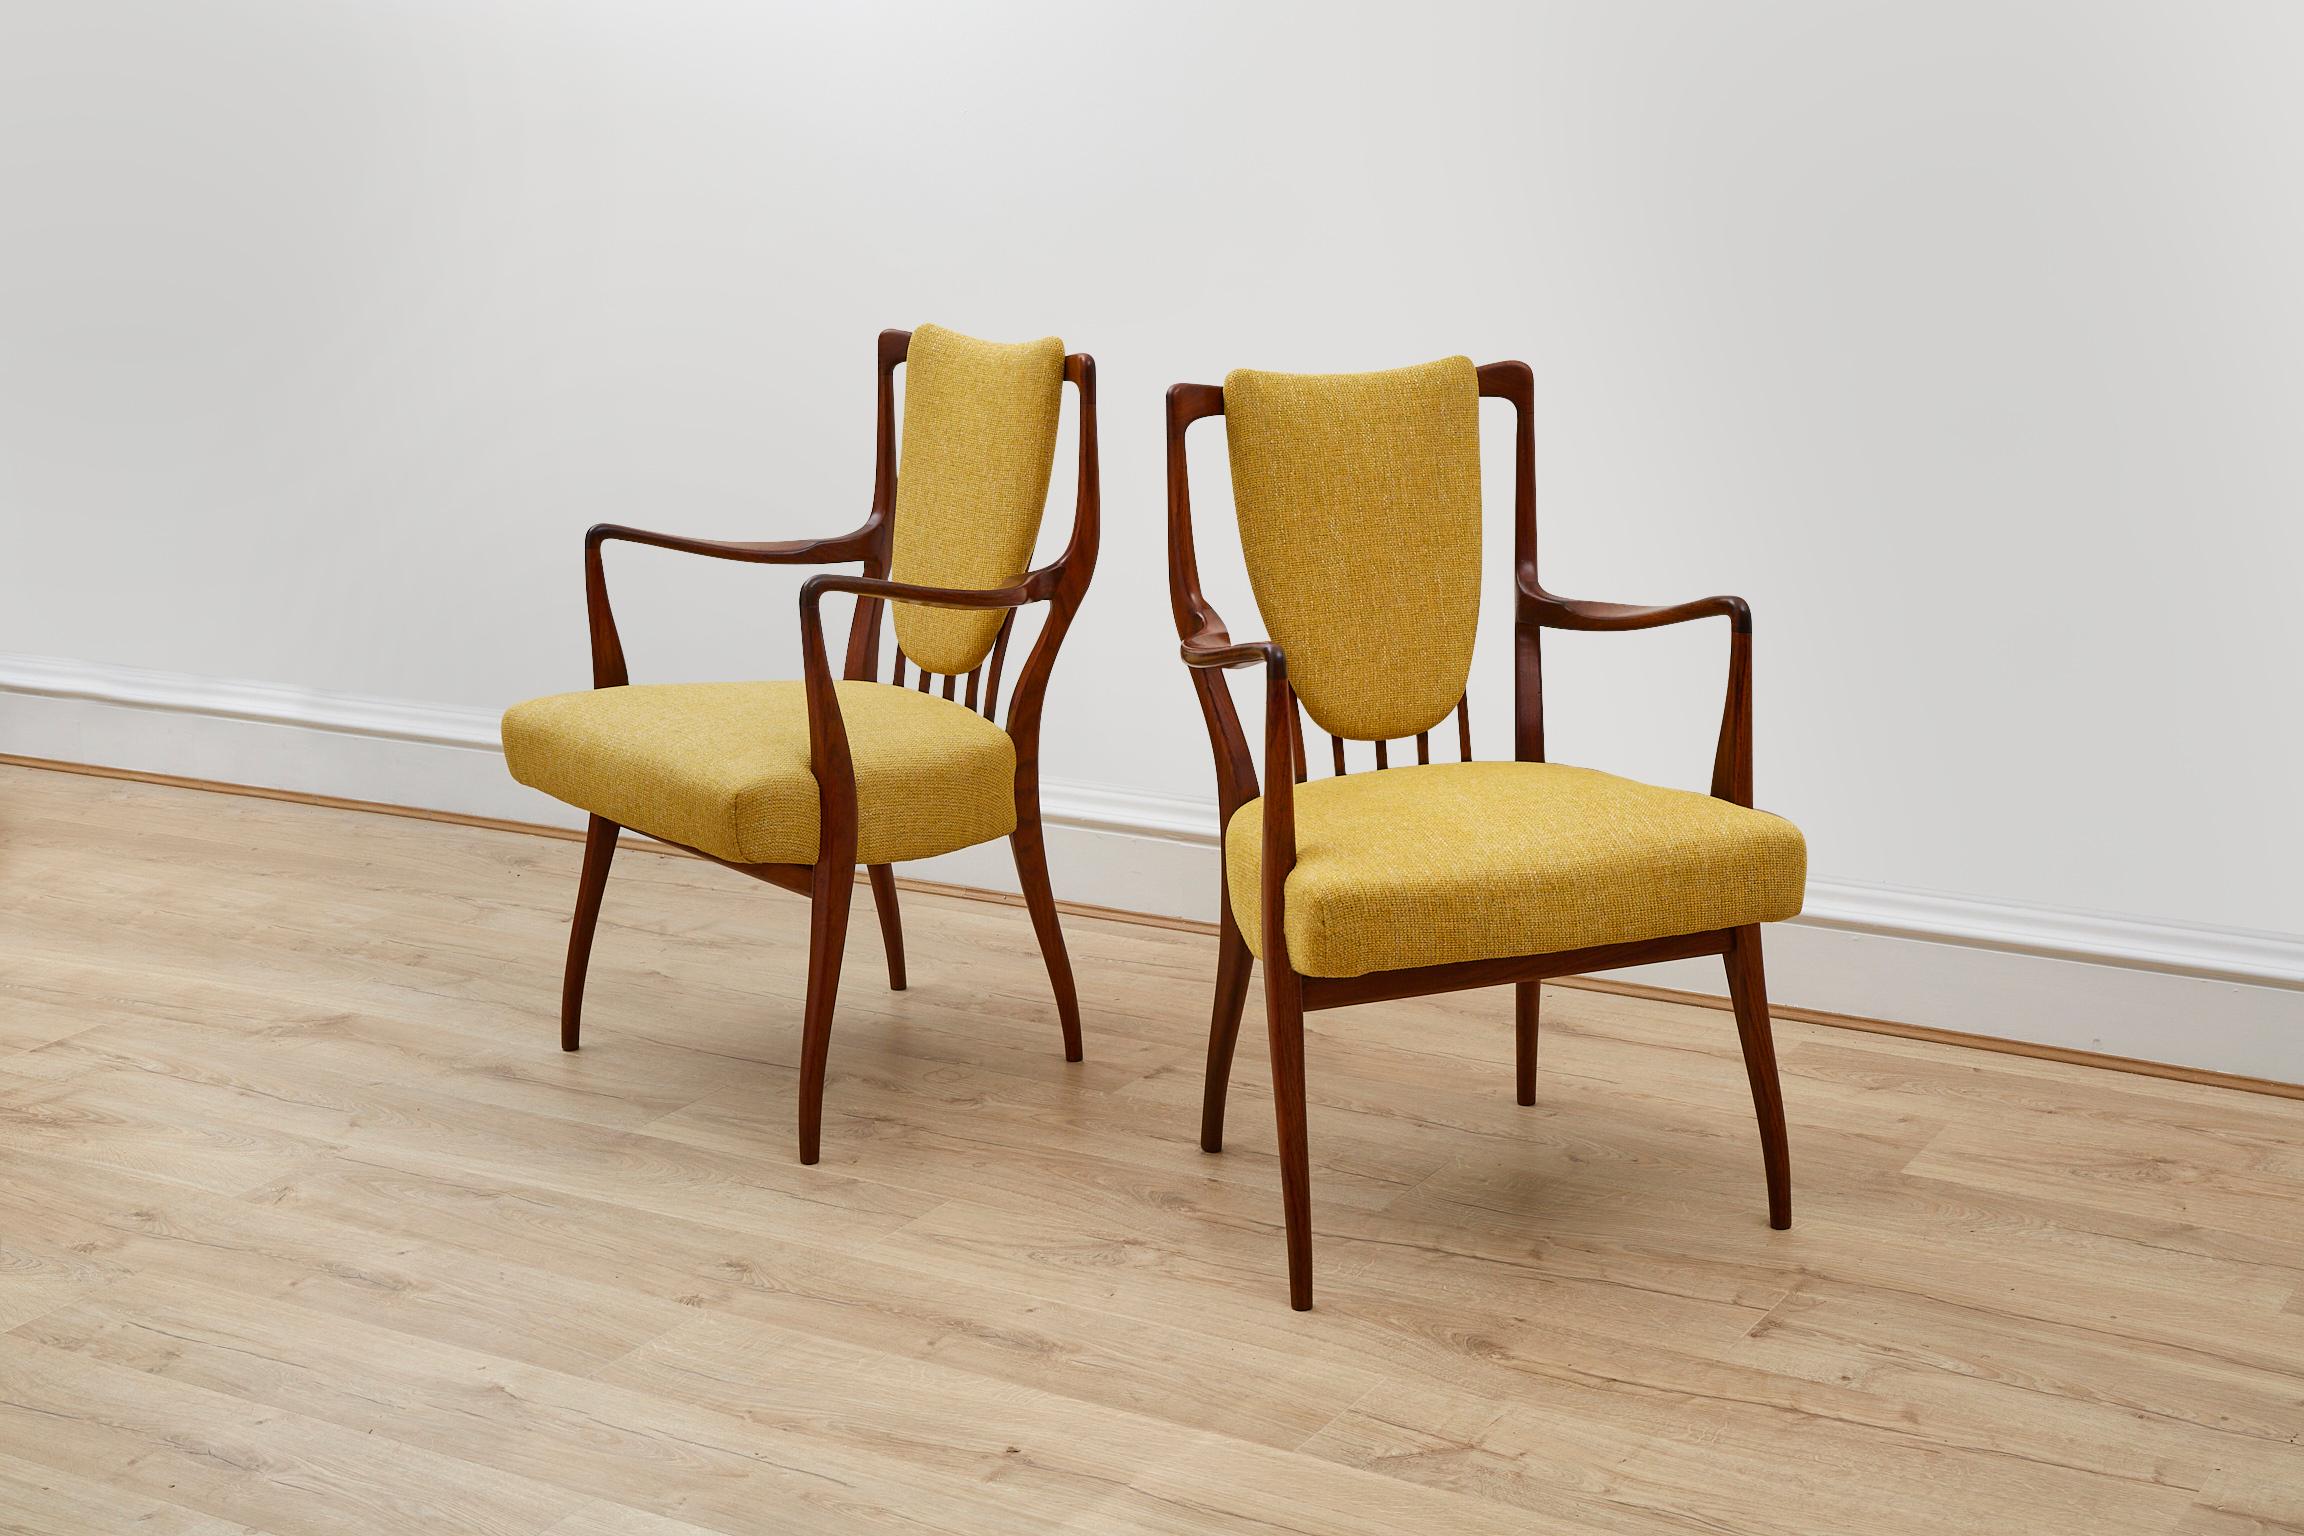 A lovely and rare pair of side chairs by A.J Milne. Handmade in England by Heals in the 1950’s. Rosewood frames are recently reupholstered in a mustard fabric.

A.J. Milne, also known as Andrew J. Milne, served as the Chief Designer for Heal & Son,